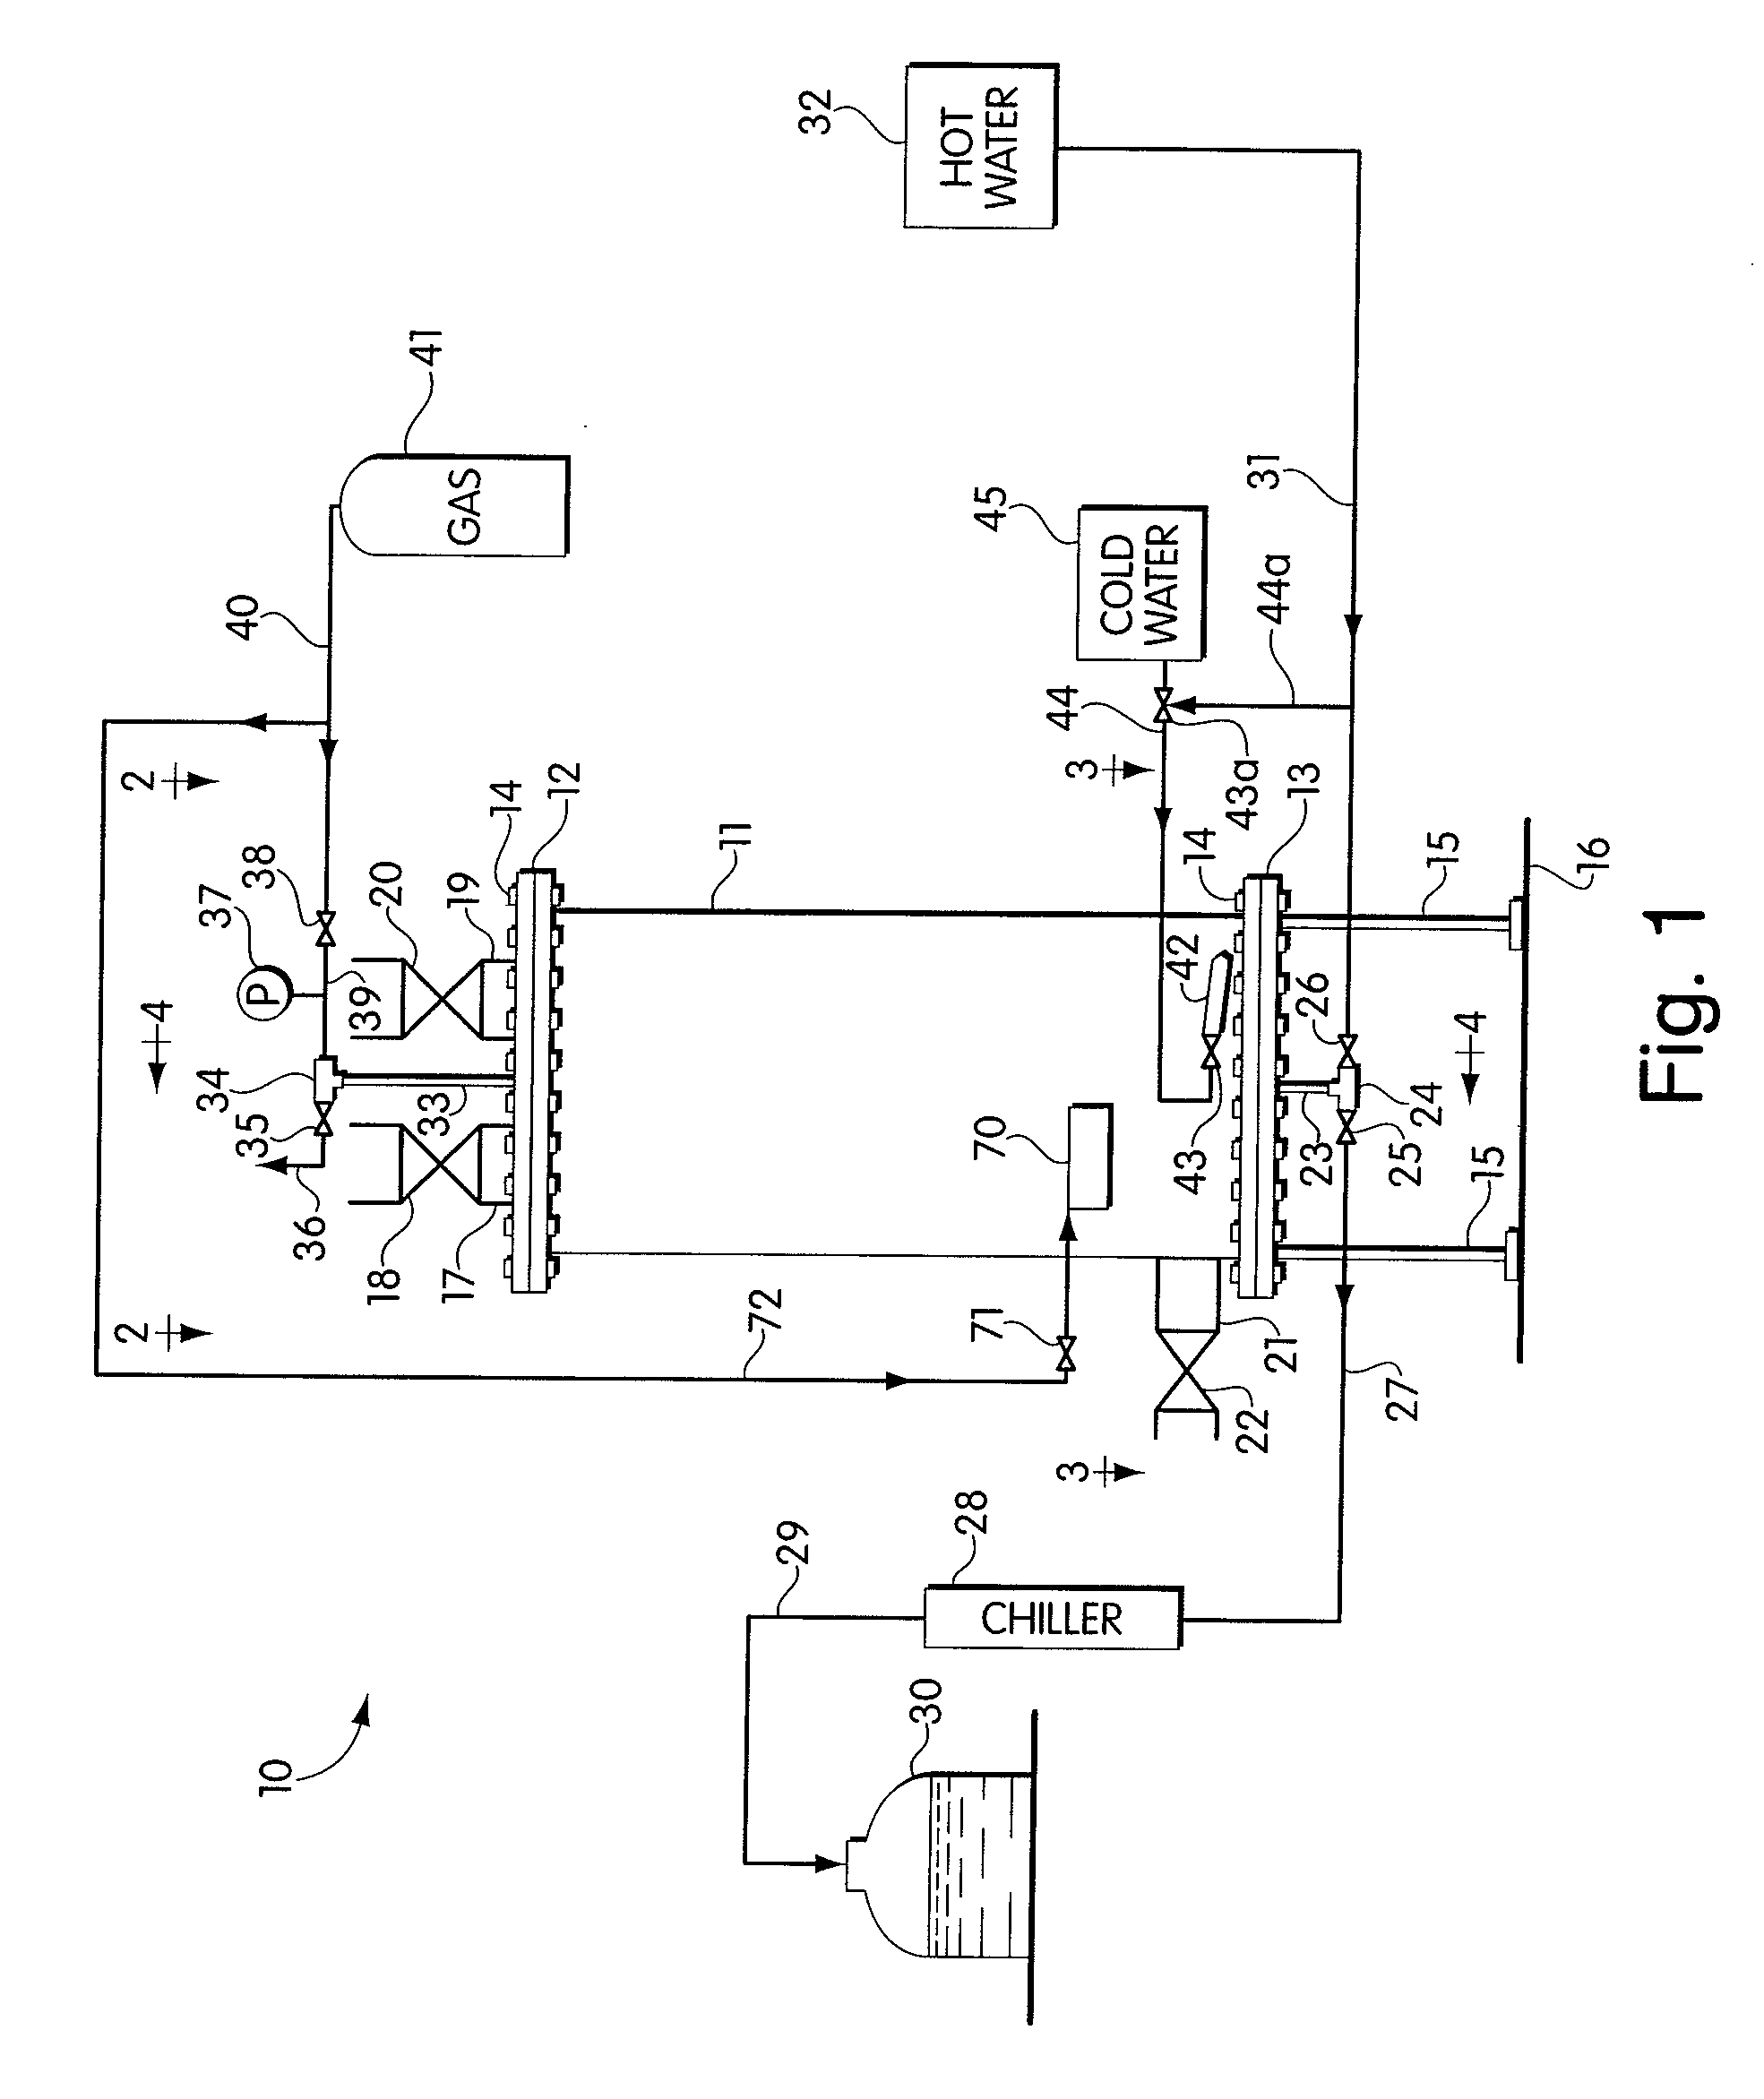 Methods and systems for forming concentrated consumable extracts